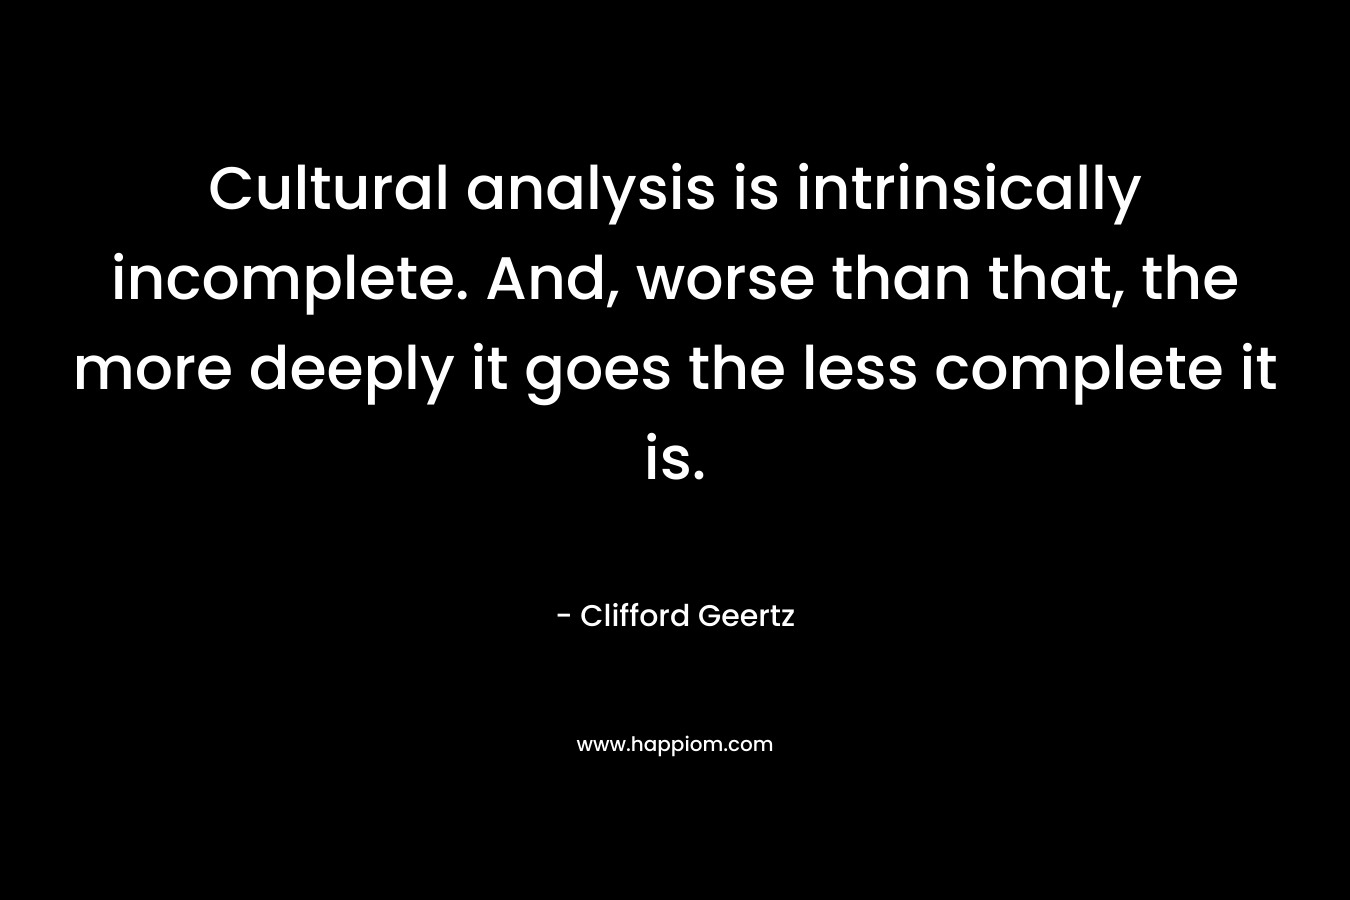 Cultural analysis is intrinsically incomplete. And, worse than that, the more deeply it goes the less complete it is.